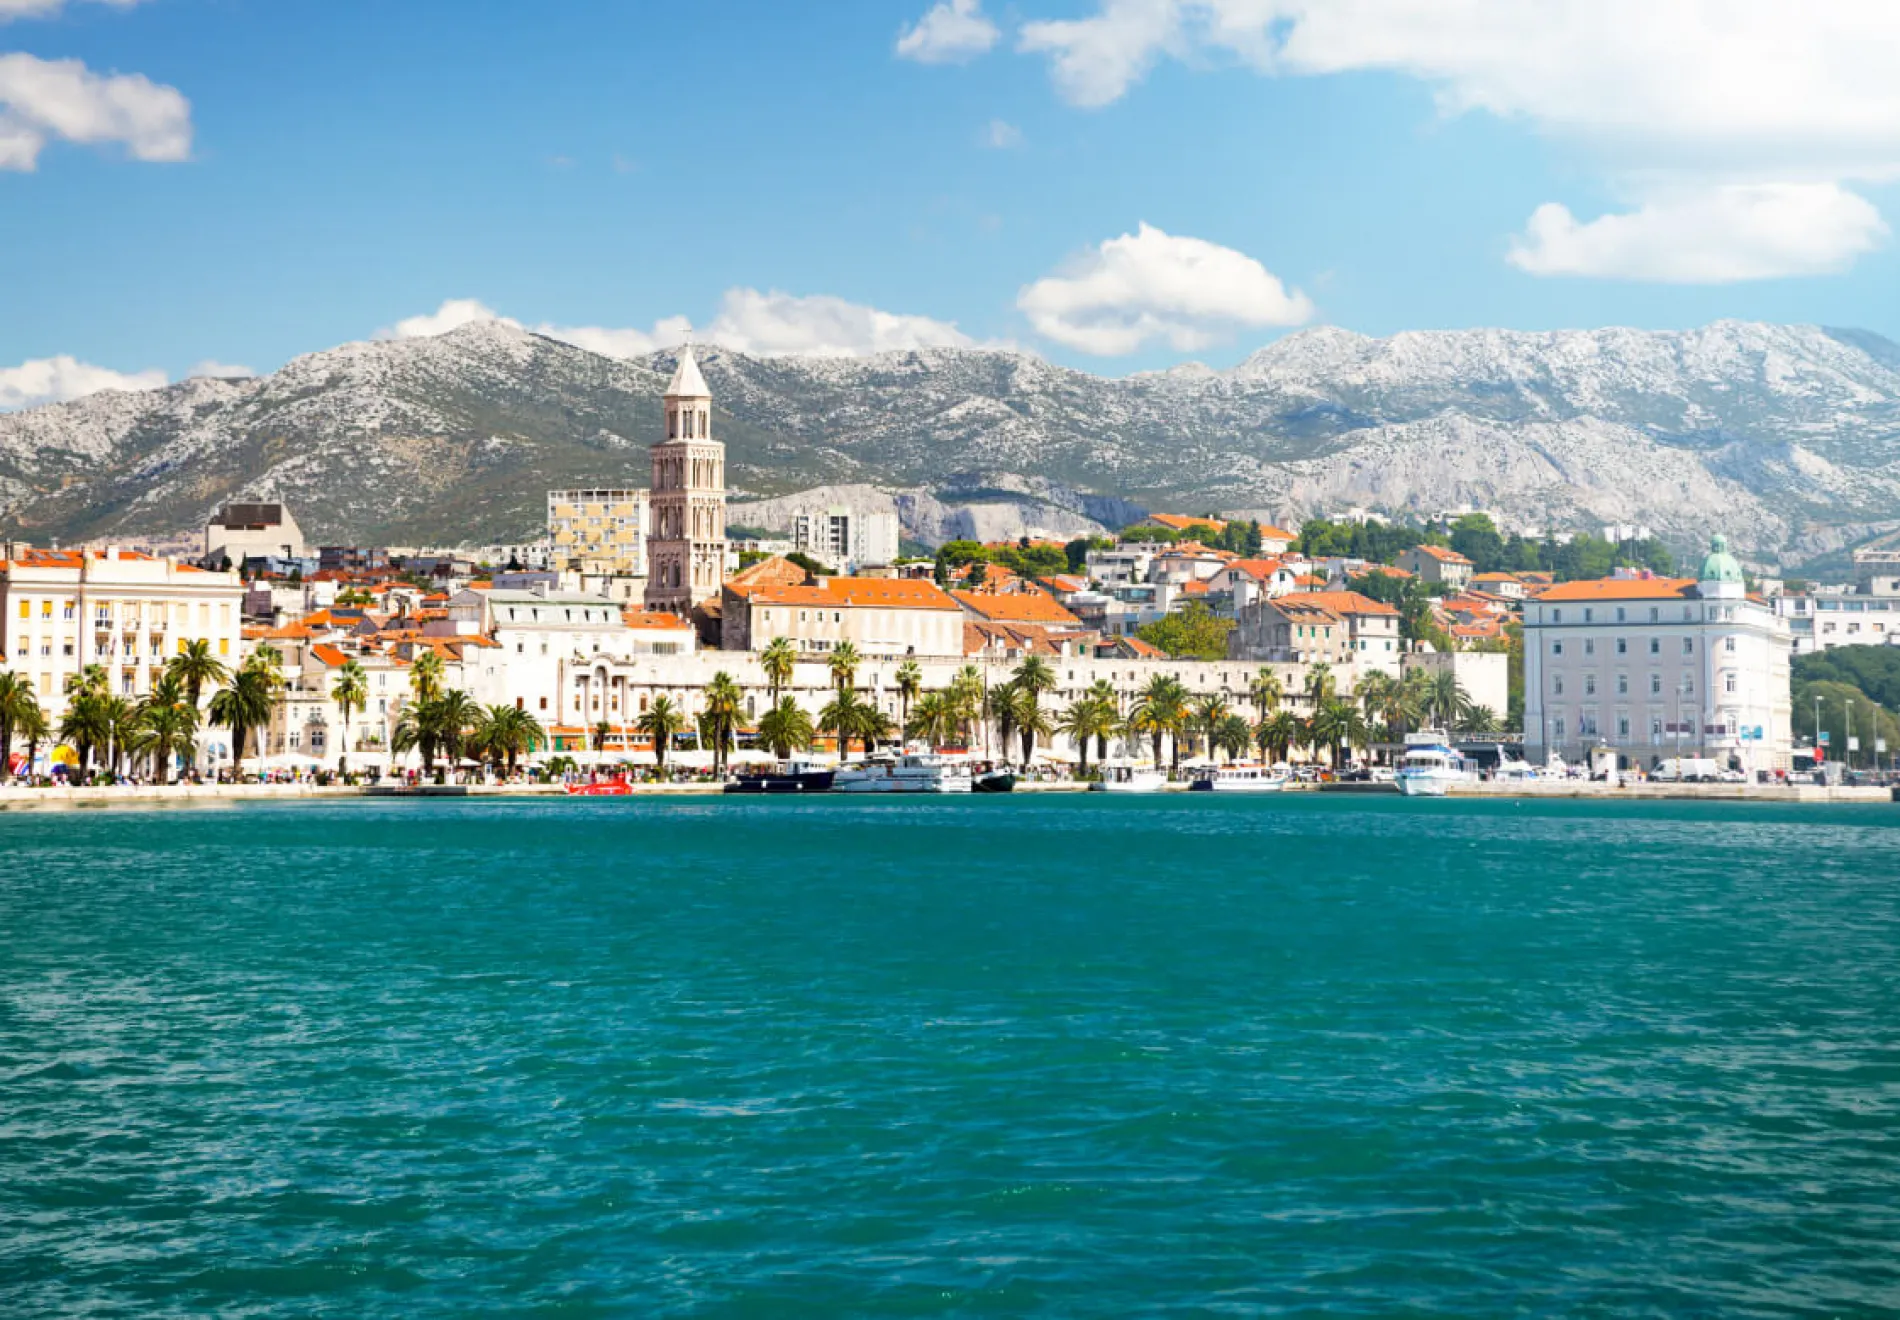 View of Riva and Old Town Split